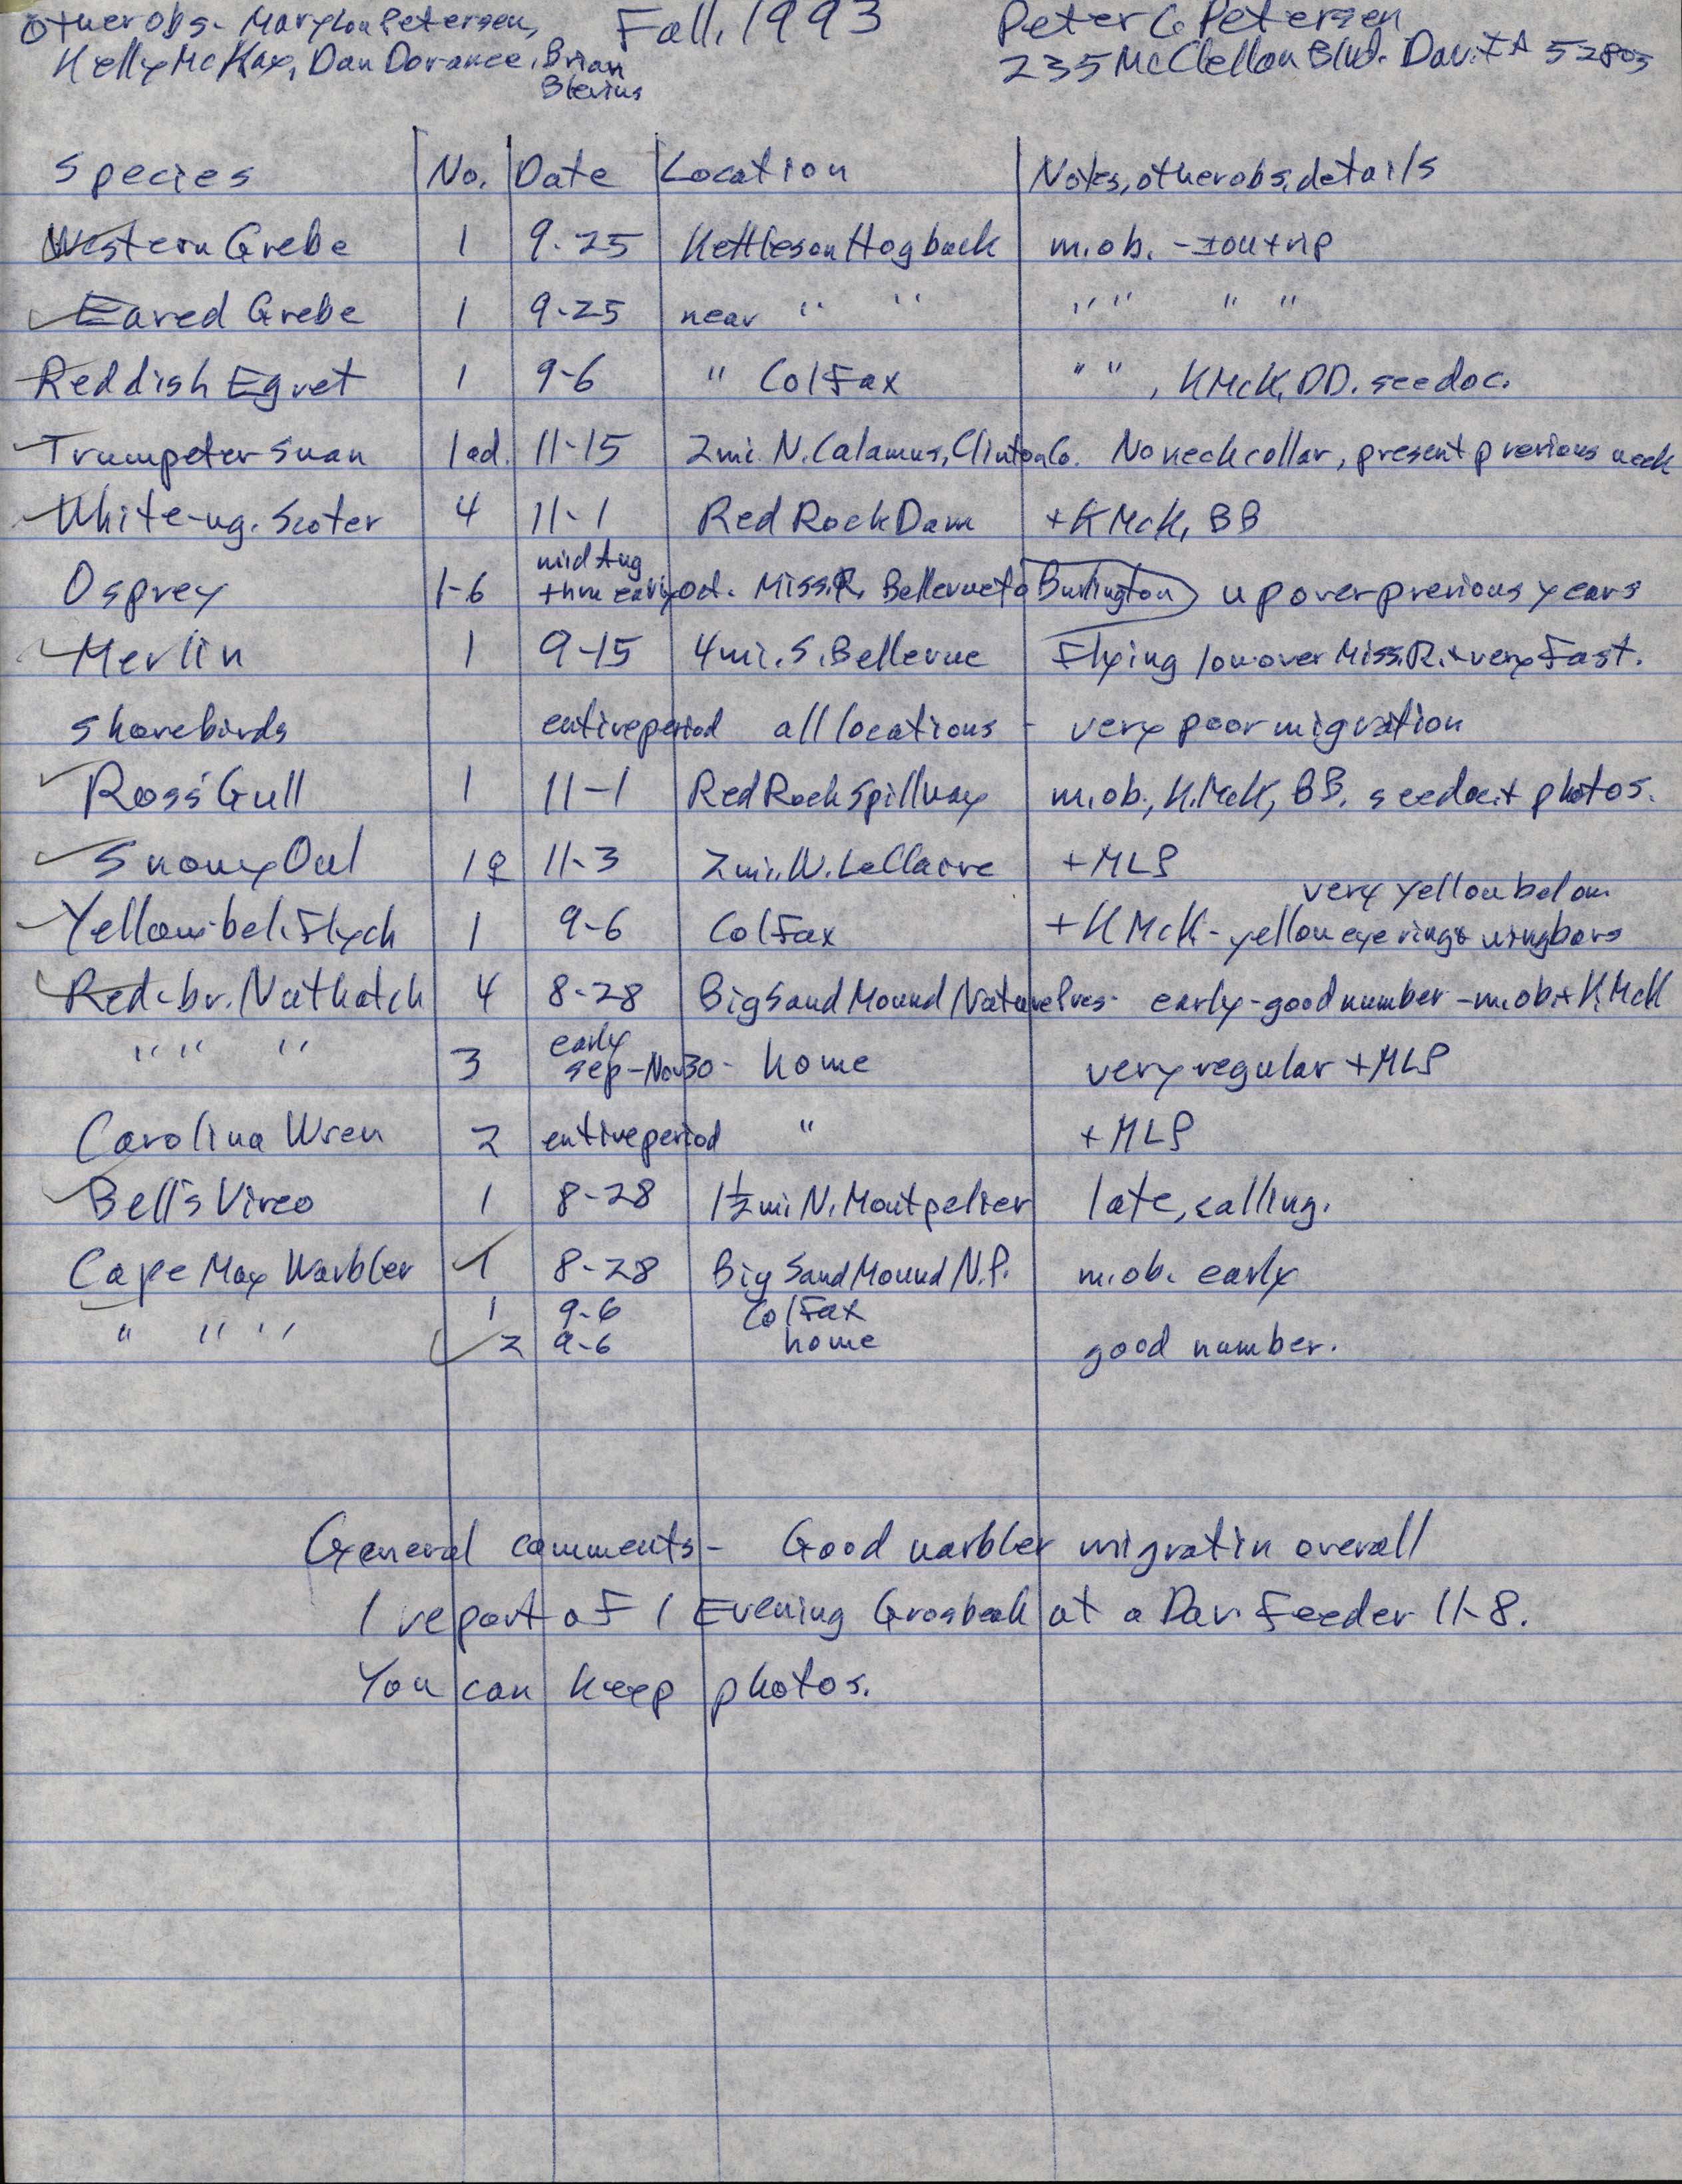 Field notes contributed by Peter C. Petersen, fall 1993